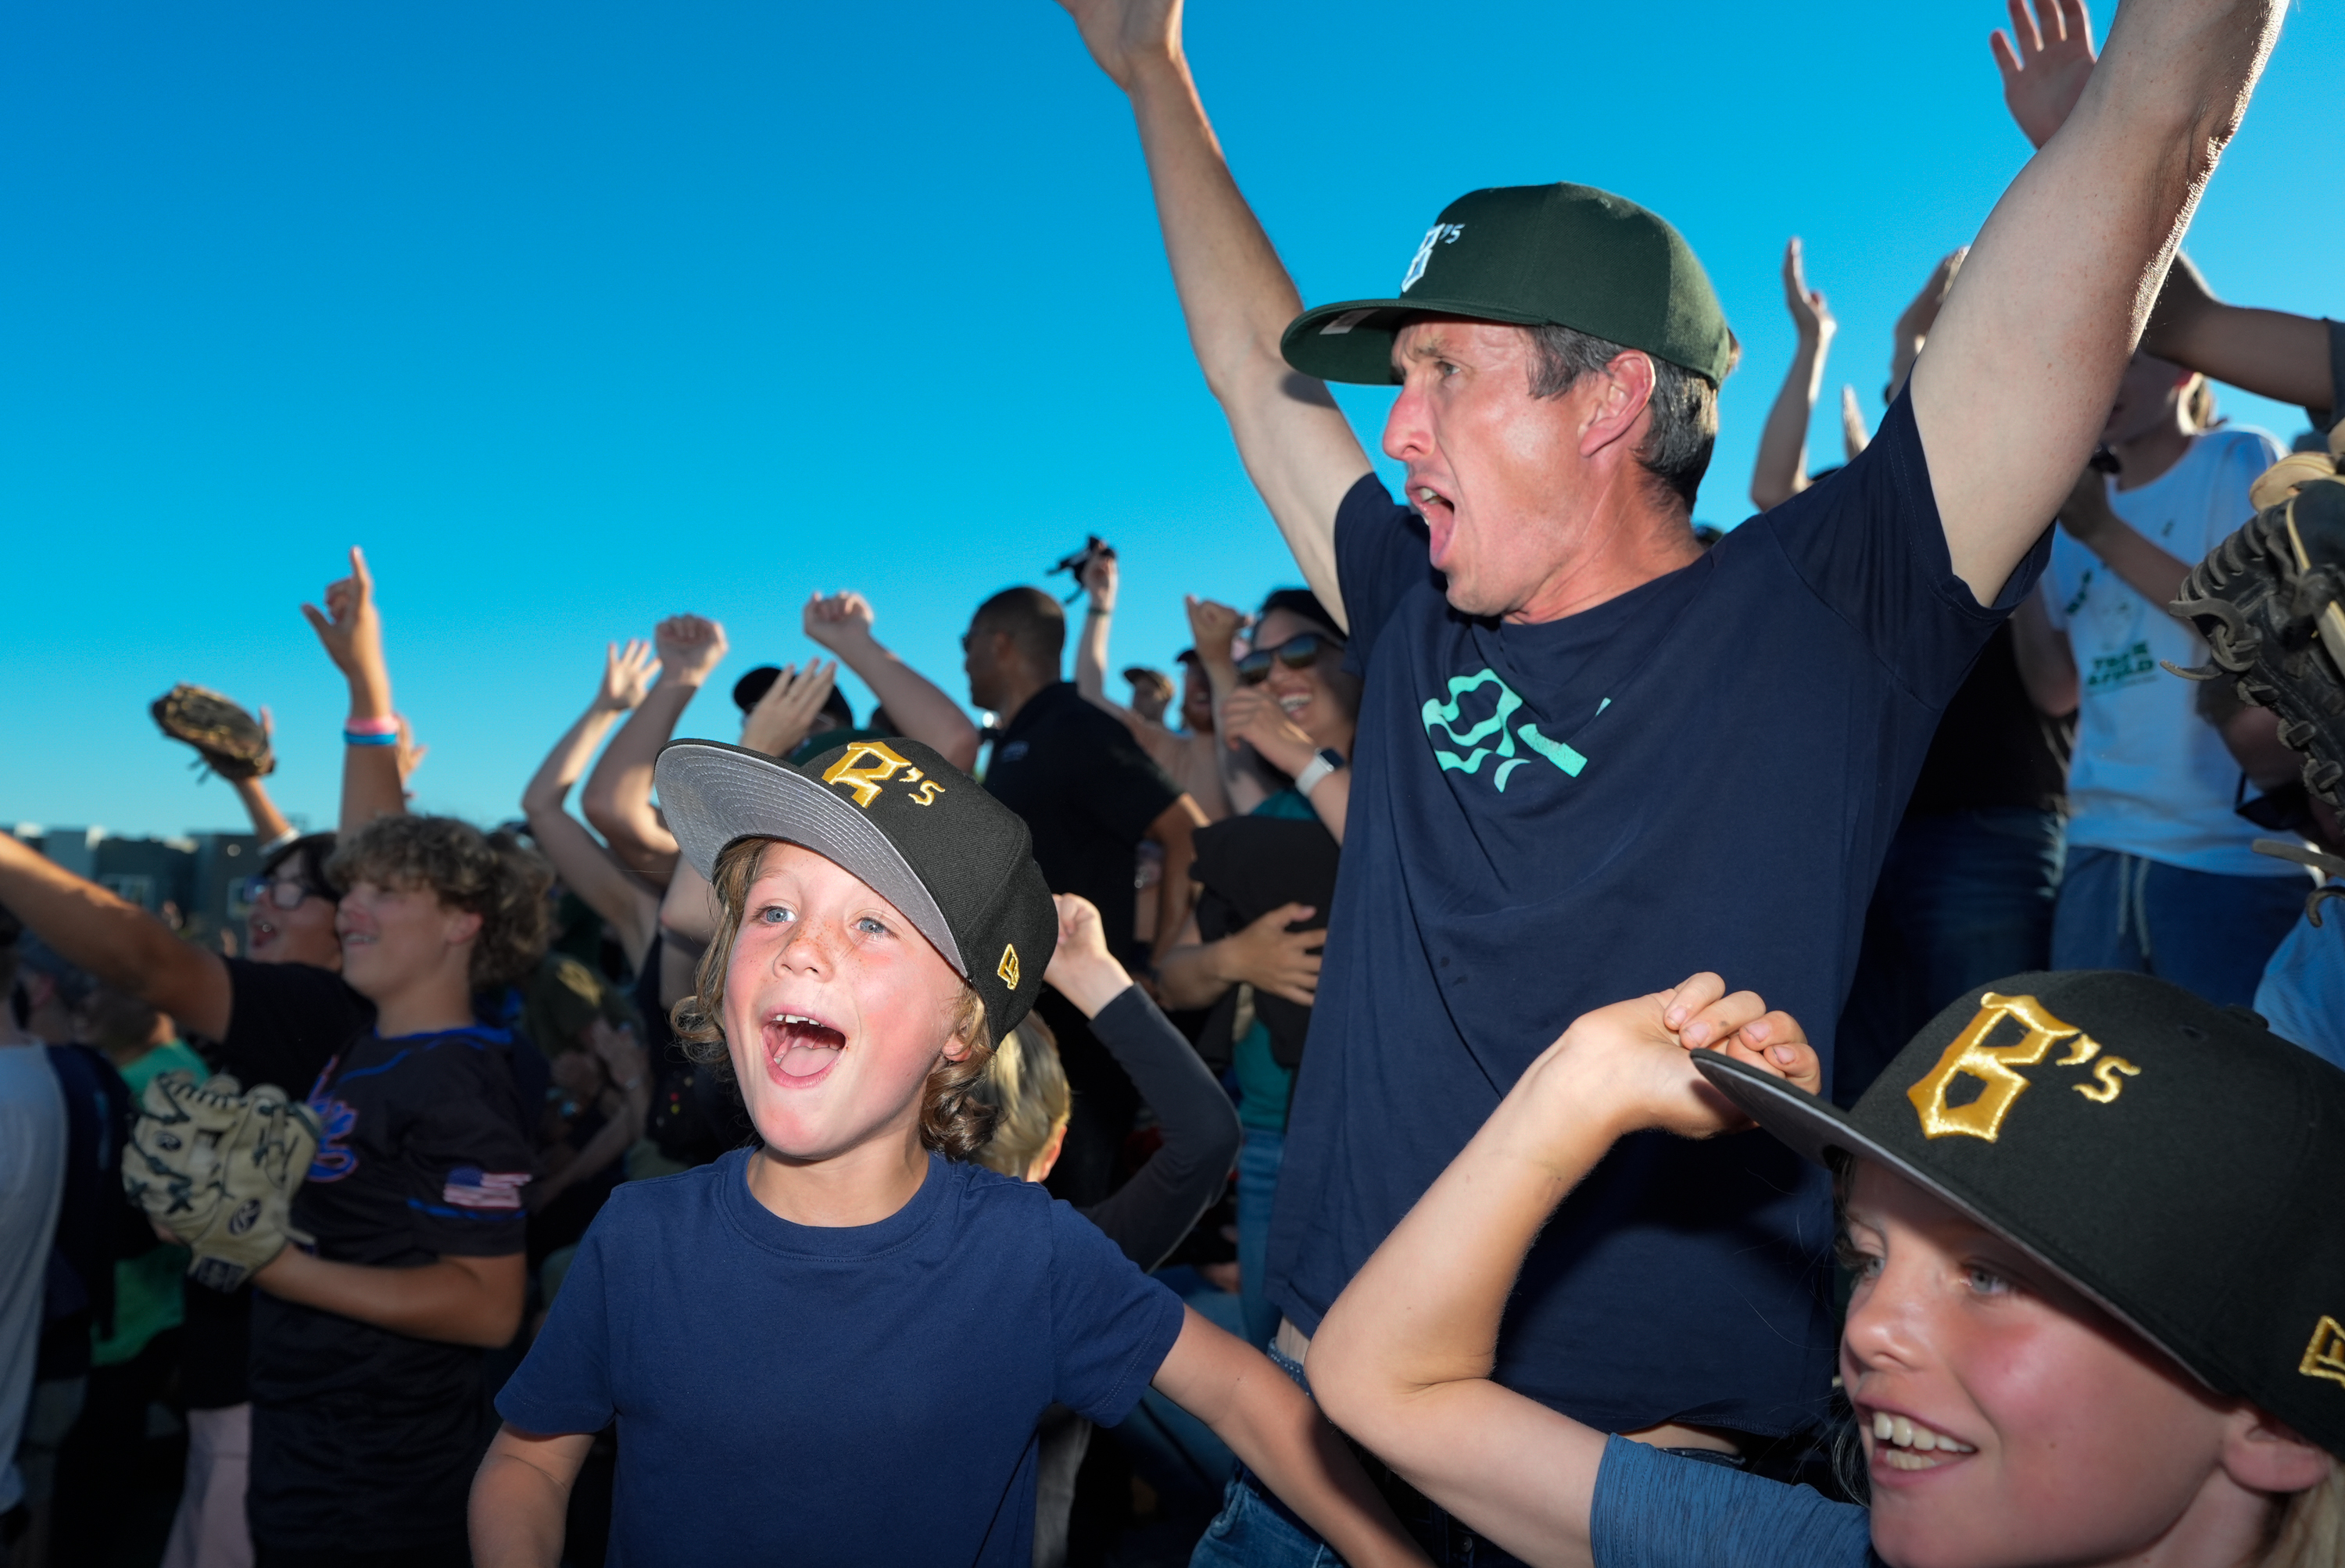 The image shows excited fans, including children and adults, cheering with their hands in the air. They are wearing matching team hats and appear to be at a sporting event.